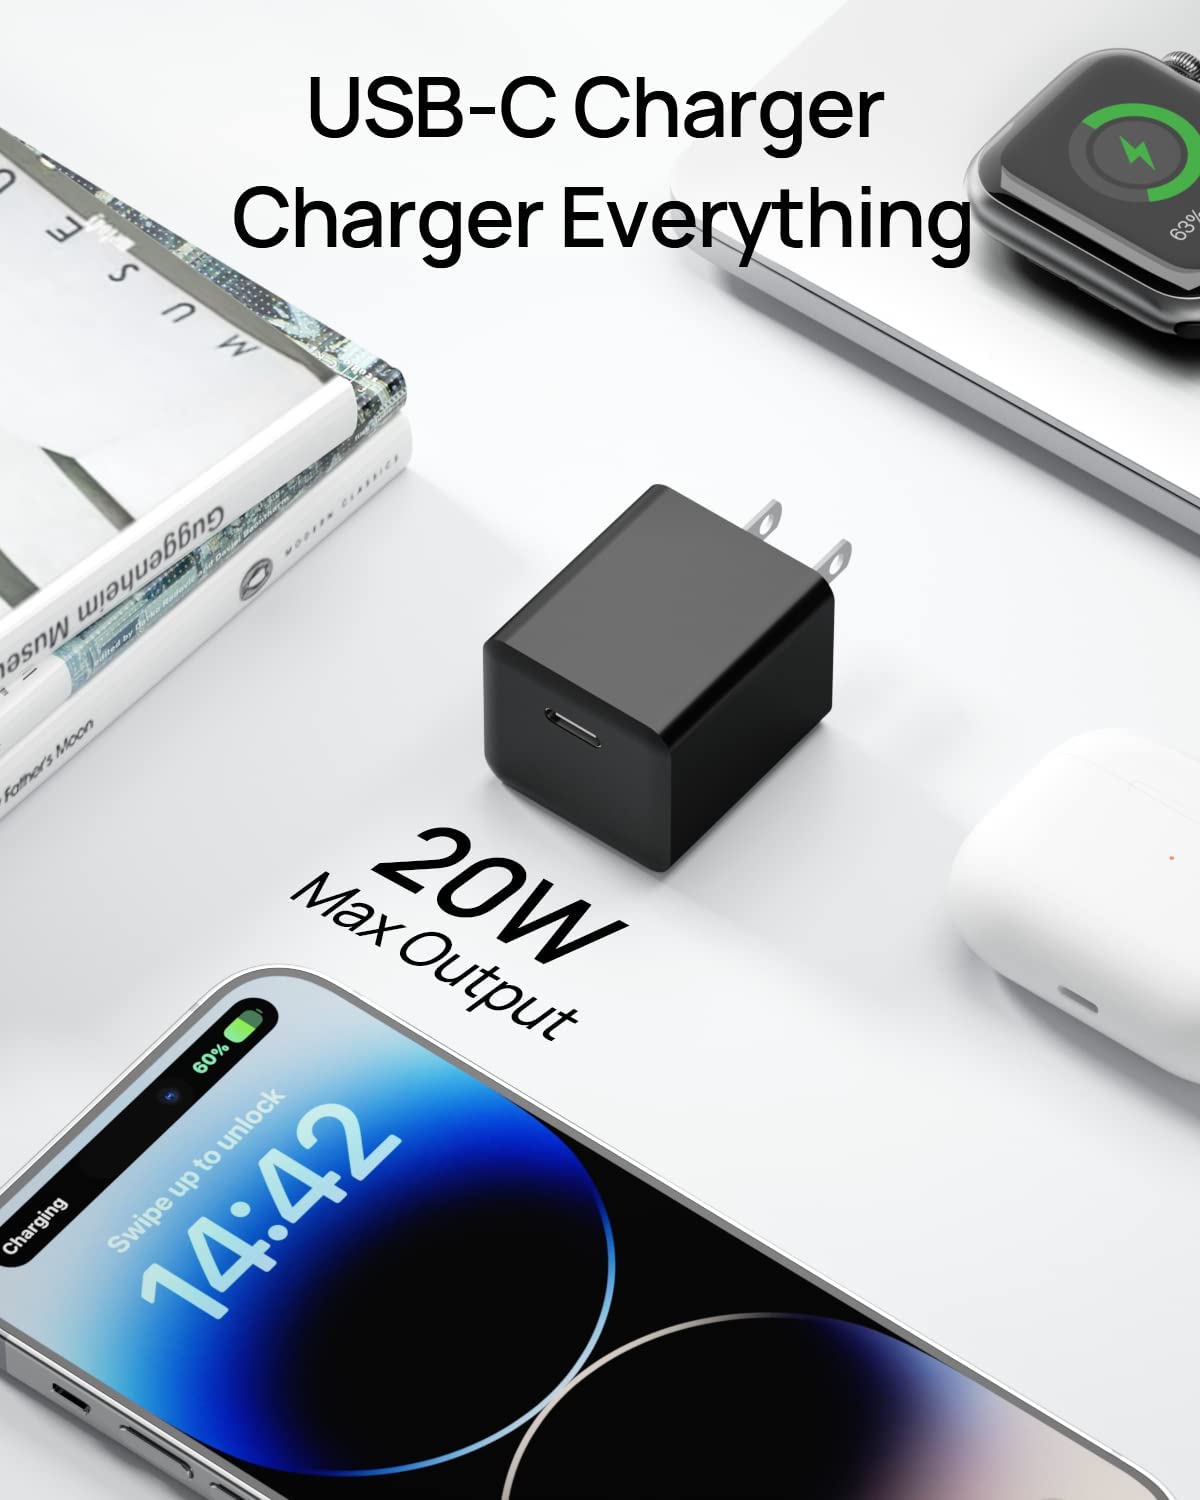 KPON USB-C Charger Charging Adapter